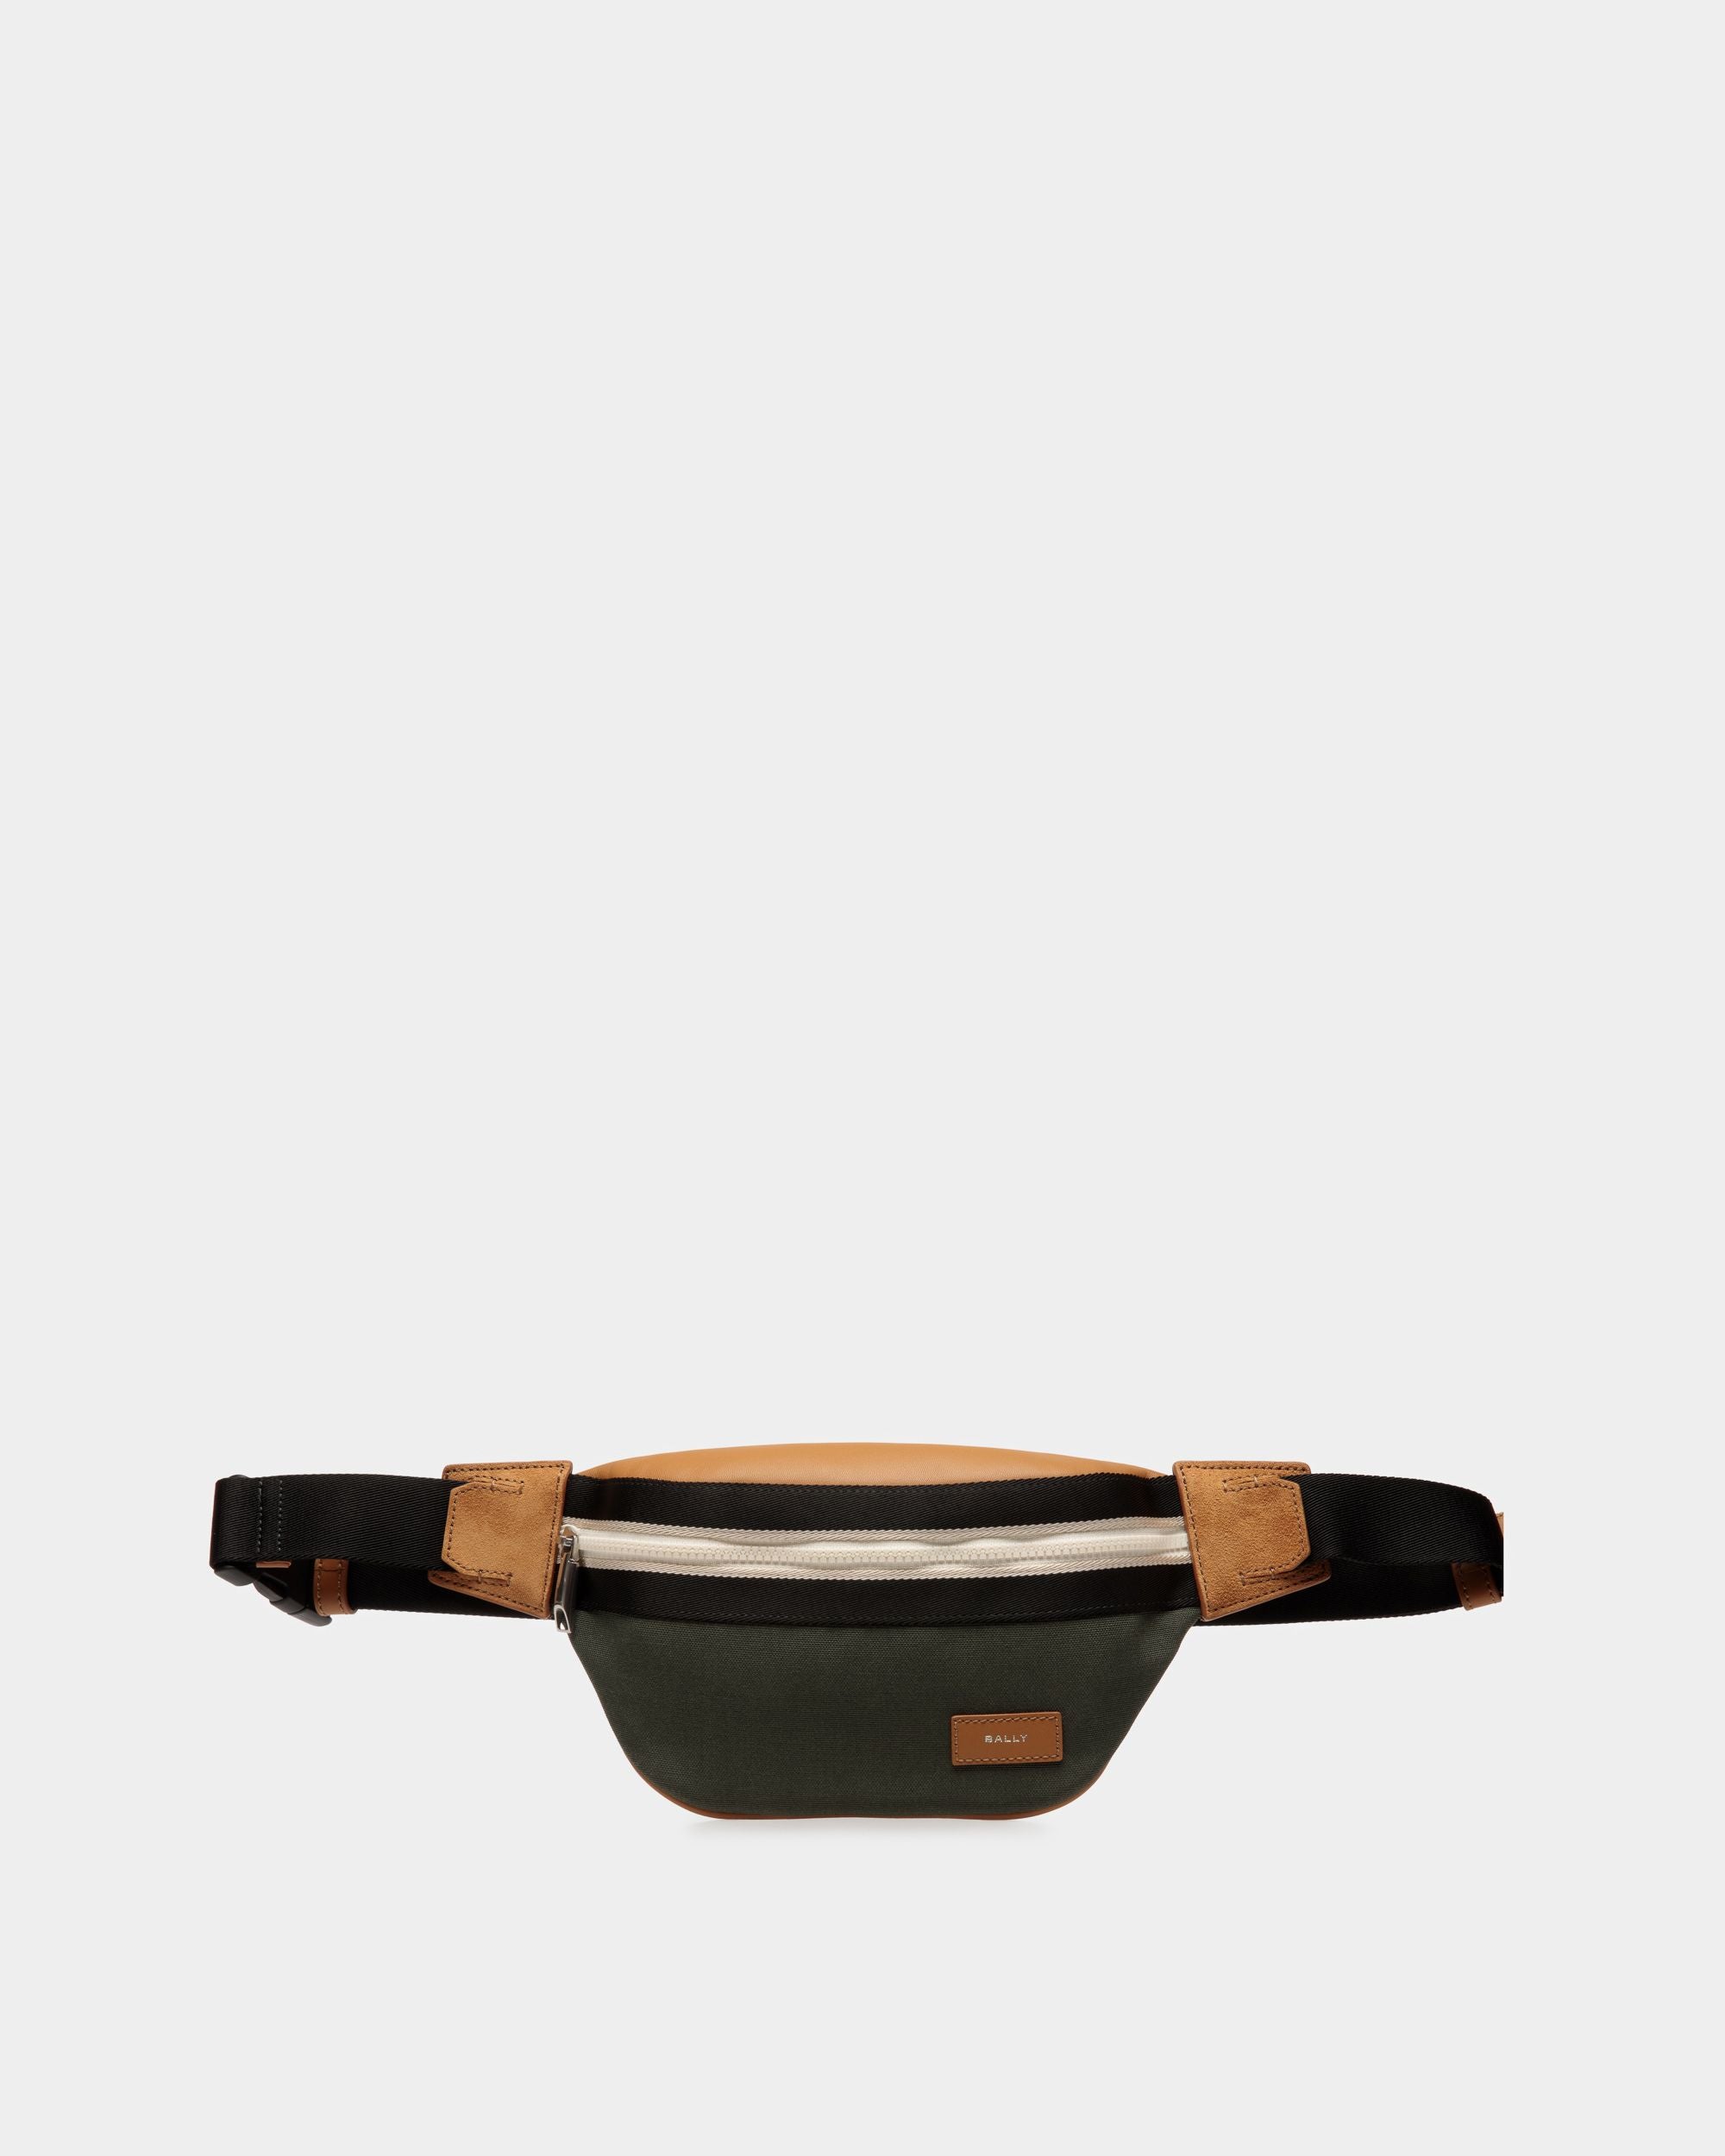 Ribbon Fanny Pack | Men's Bags | Black and Green Fabric | Bally | Still Life Front